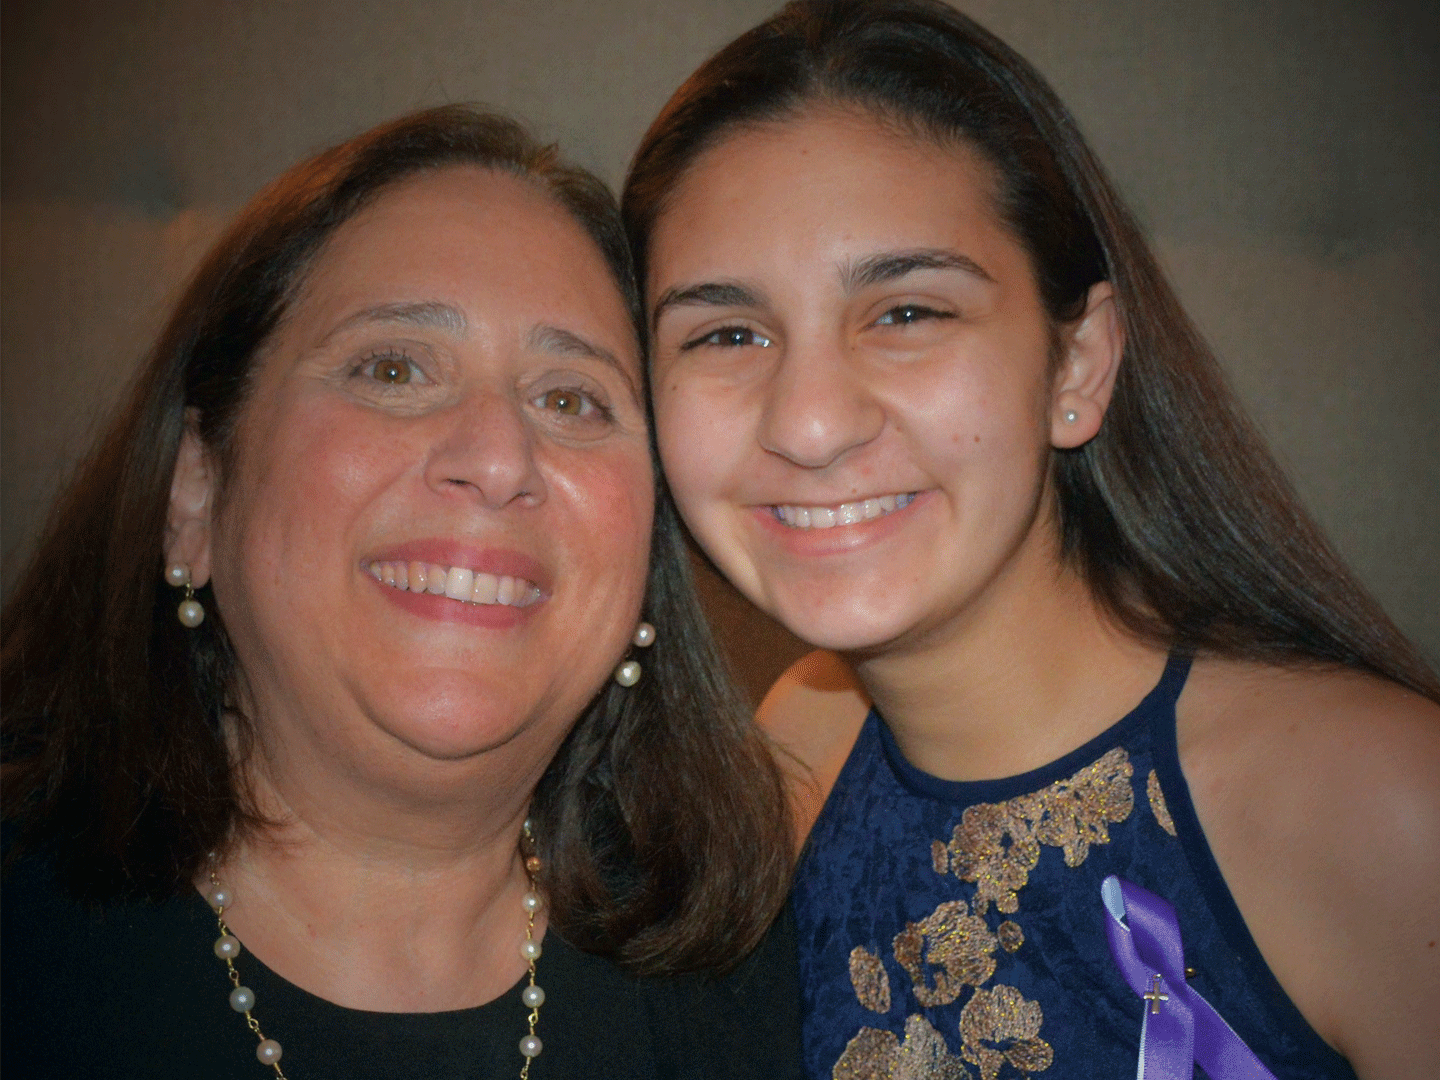 Female attorney poses with her daughter. Both are smiling.